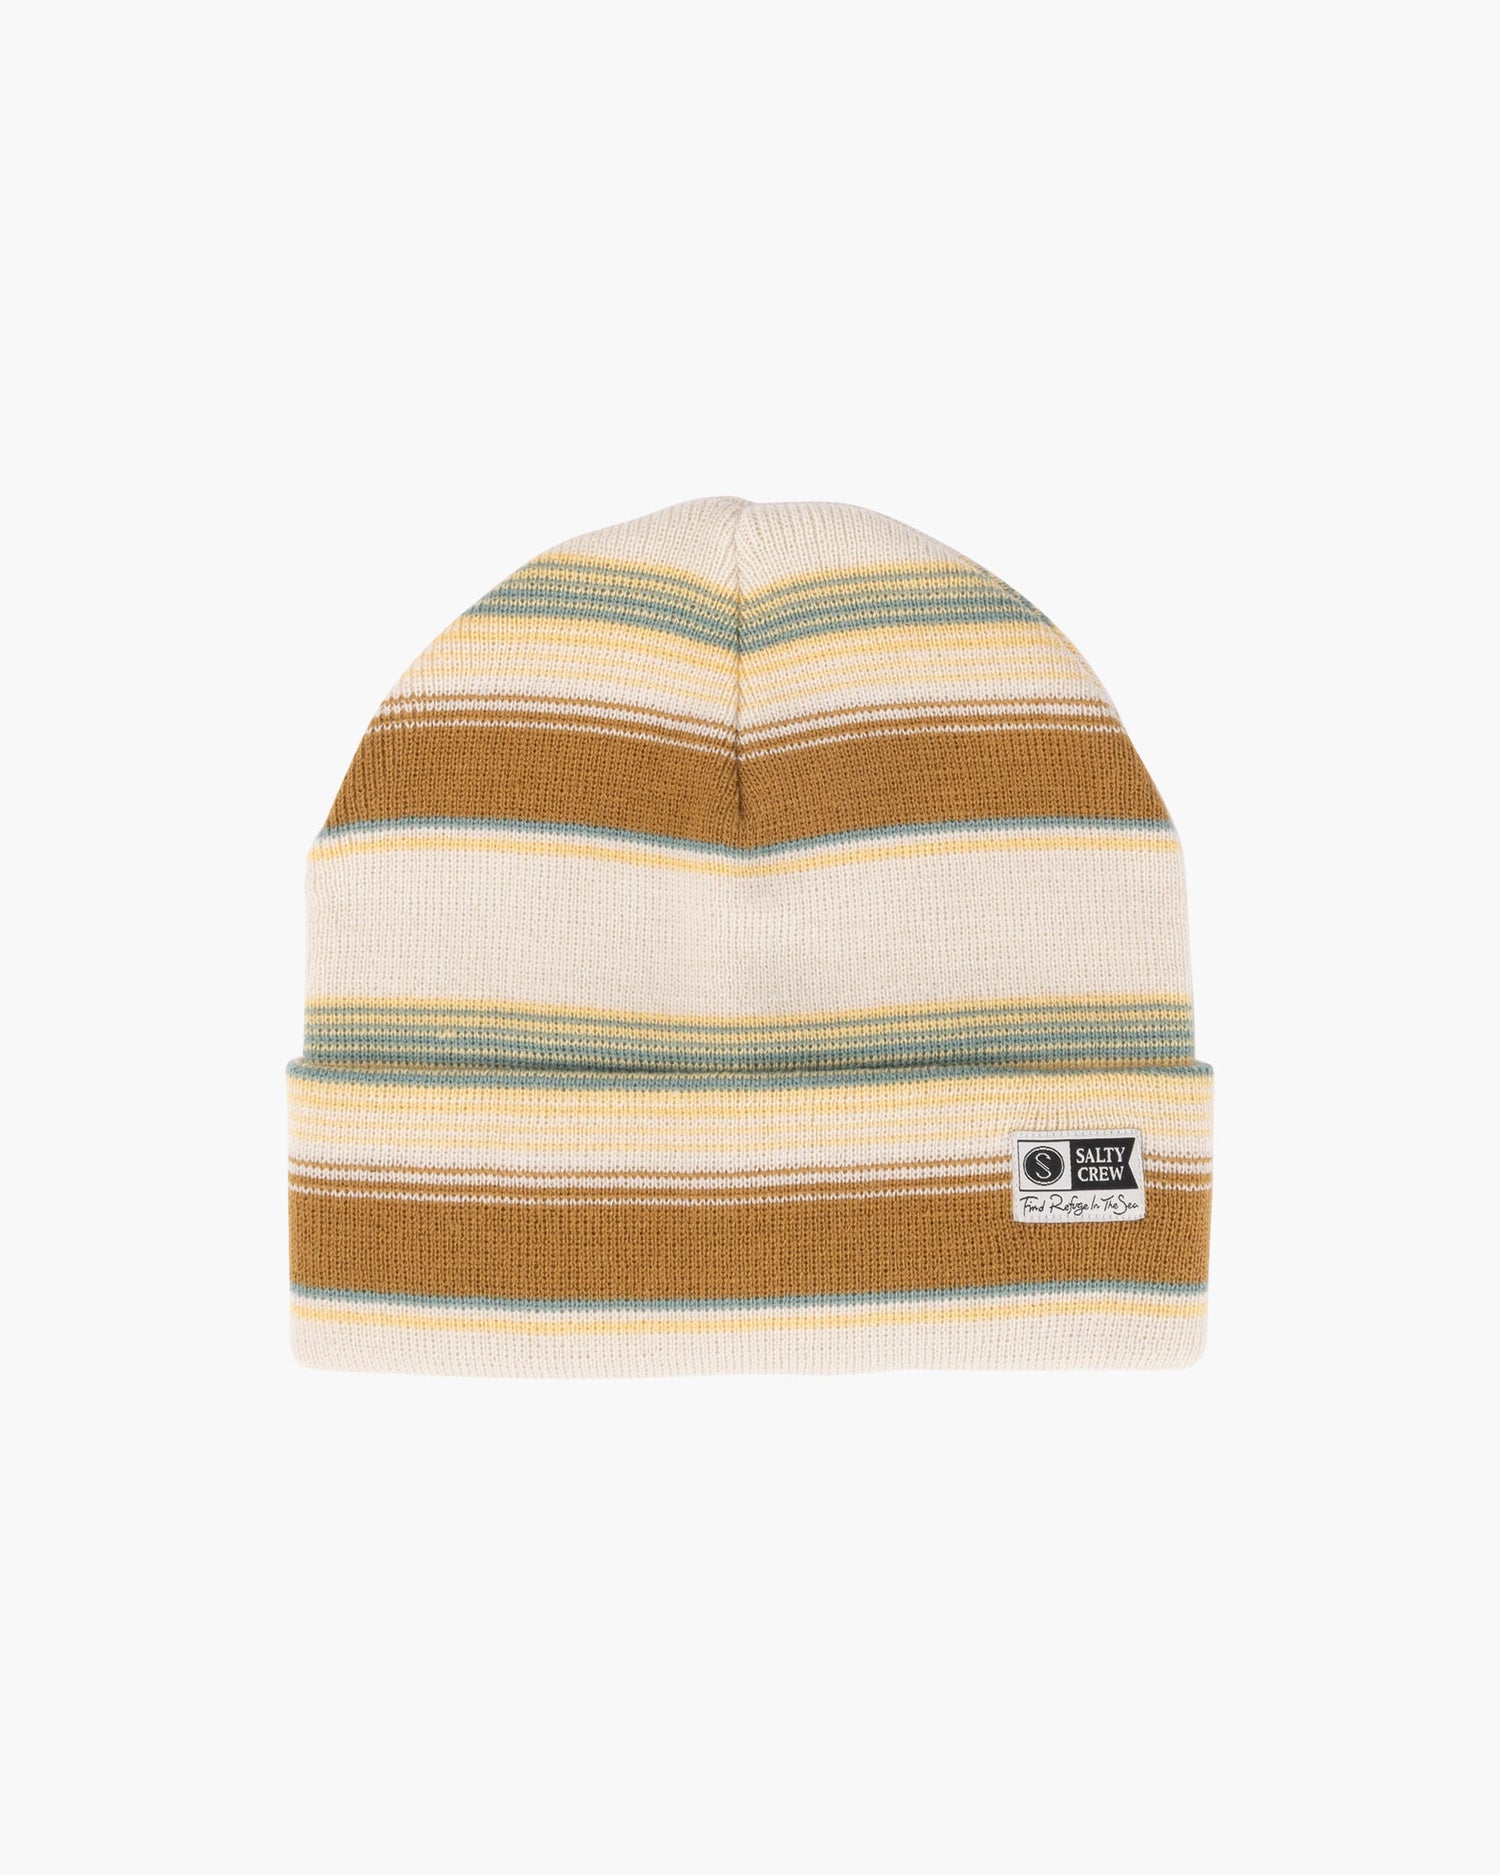 Salty crew BEANIES FRITS BEANIE - Natural in Natural